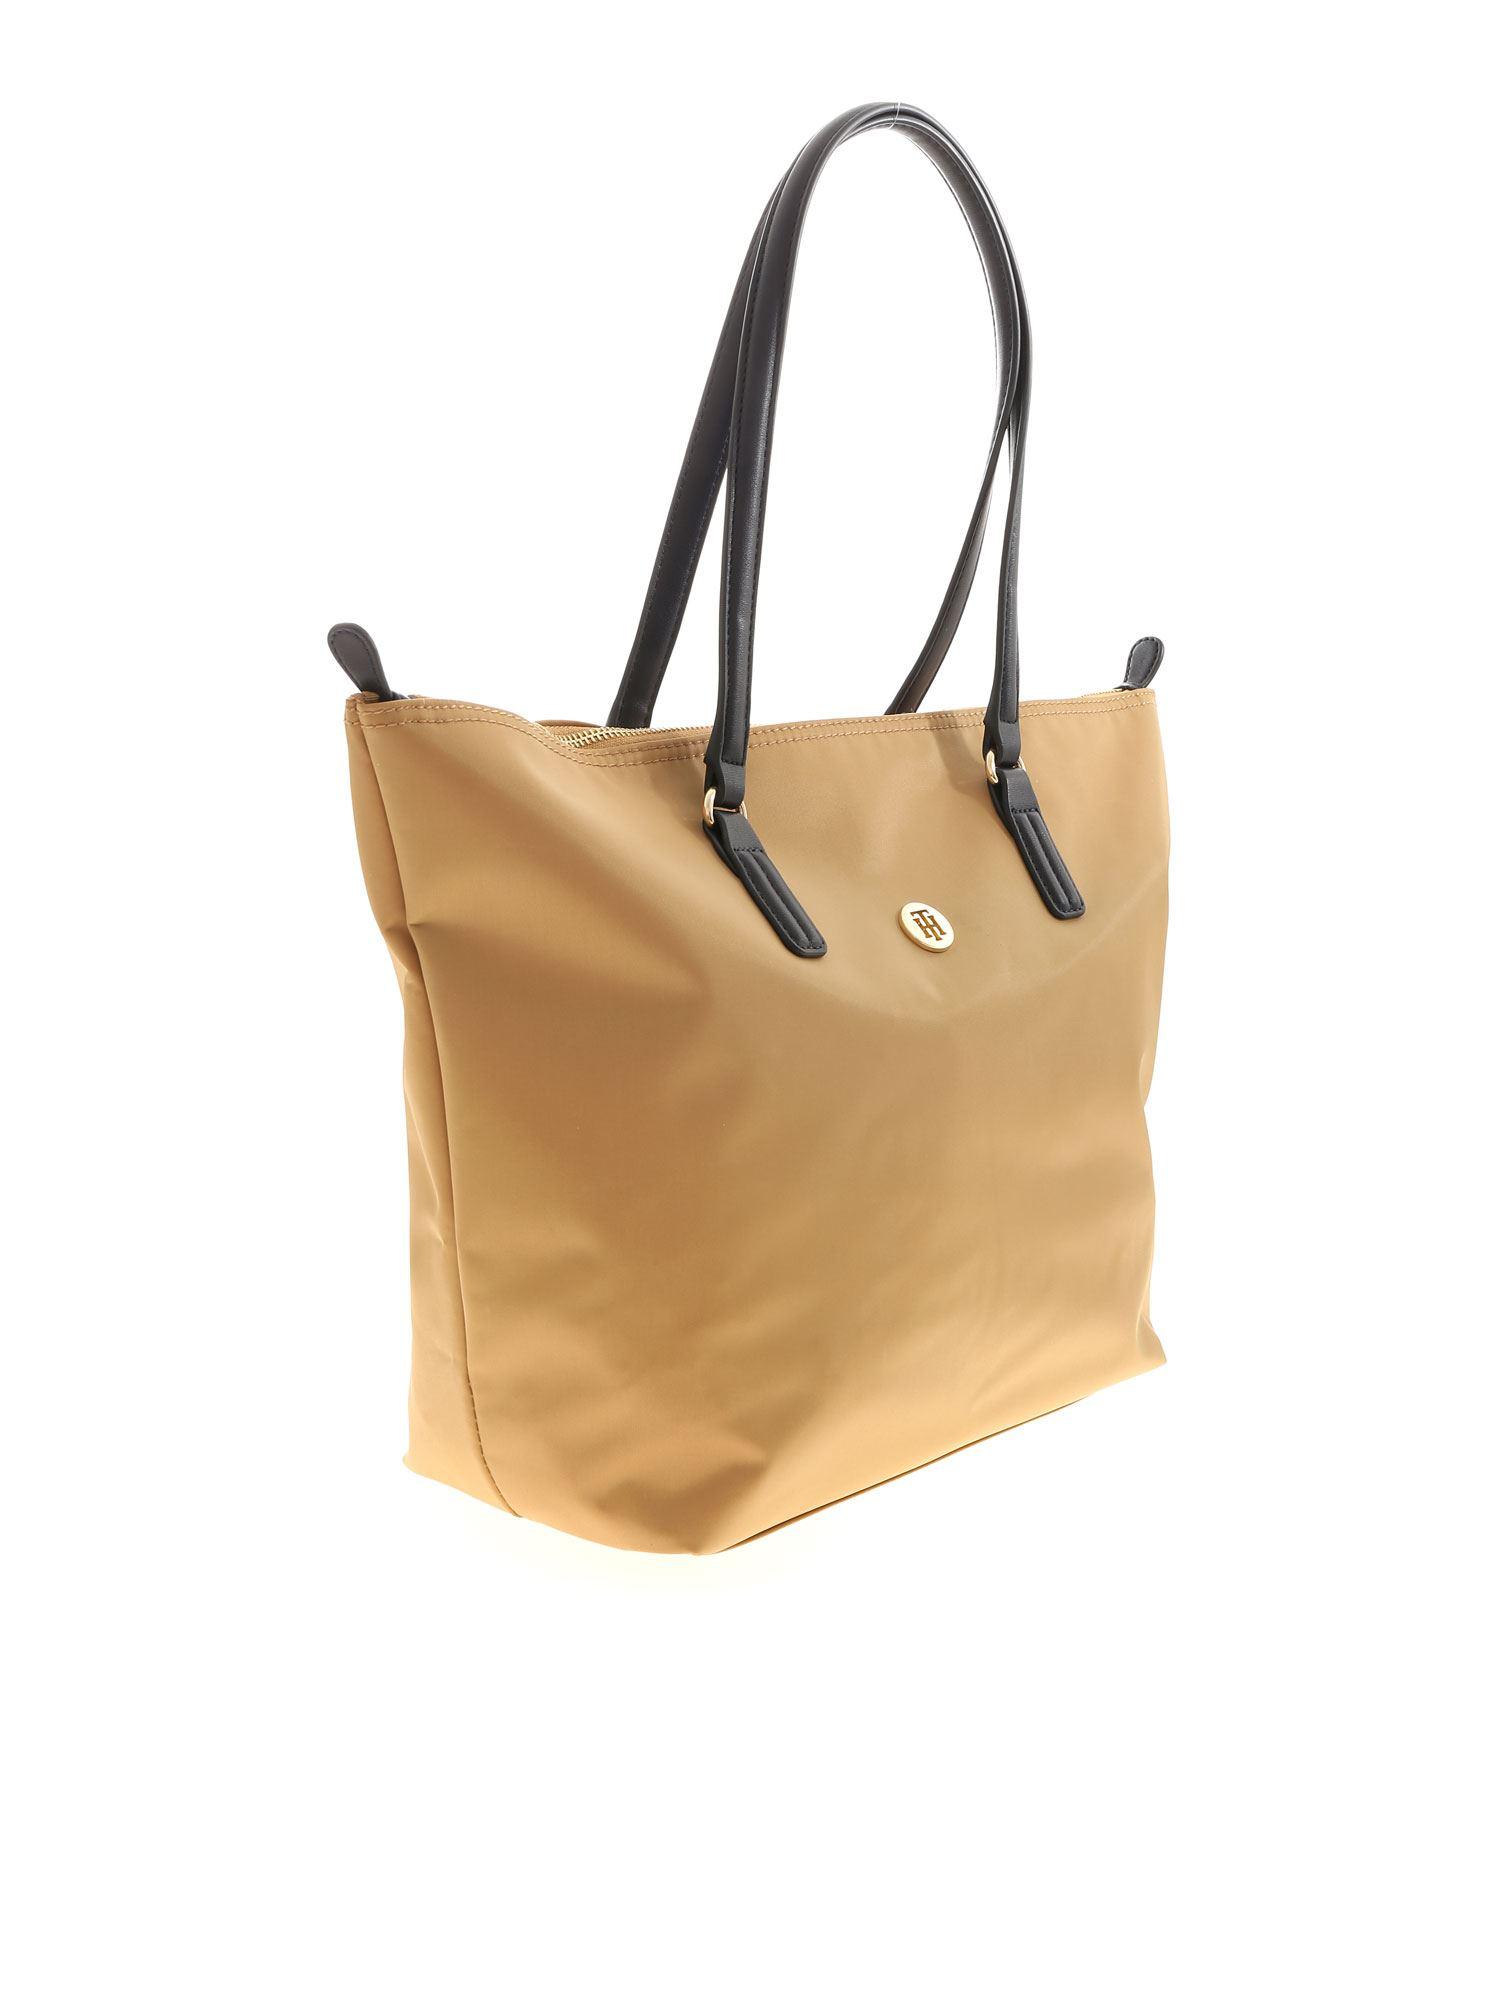 Tommy Hilfiger Poppy Tote Bag in Beige (Natural) - Lyst